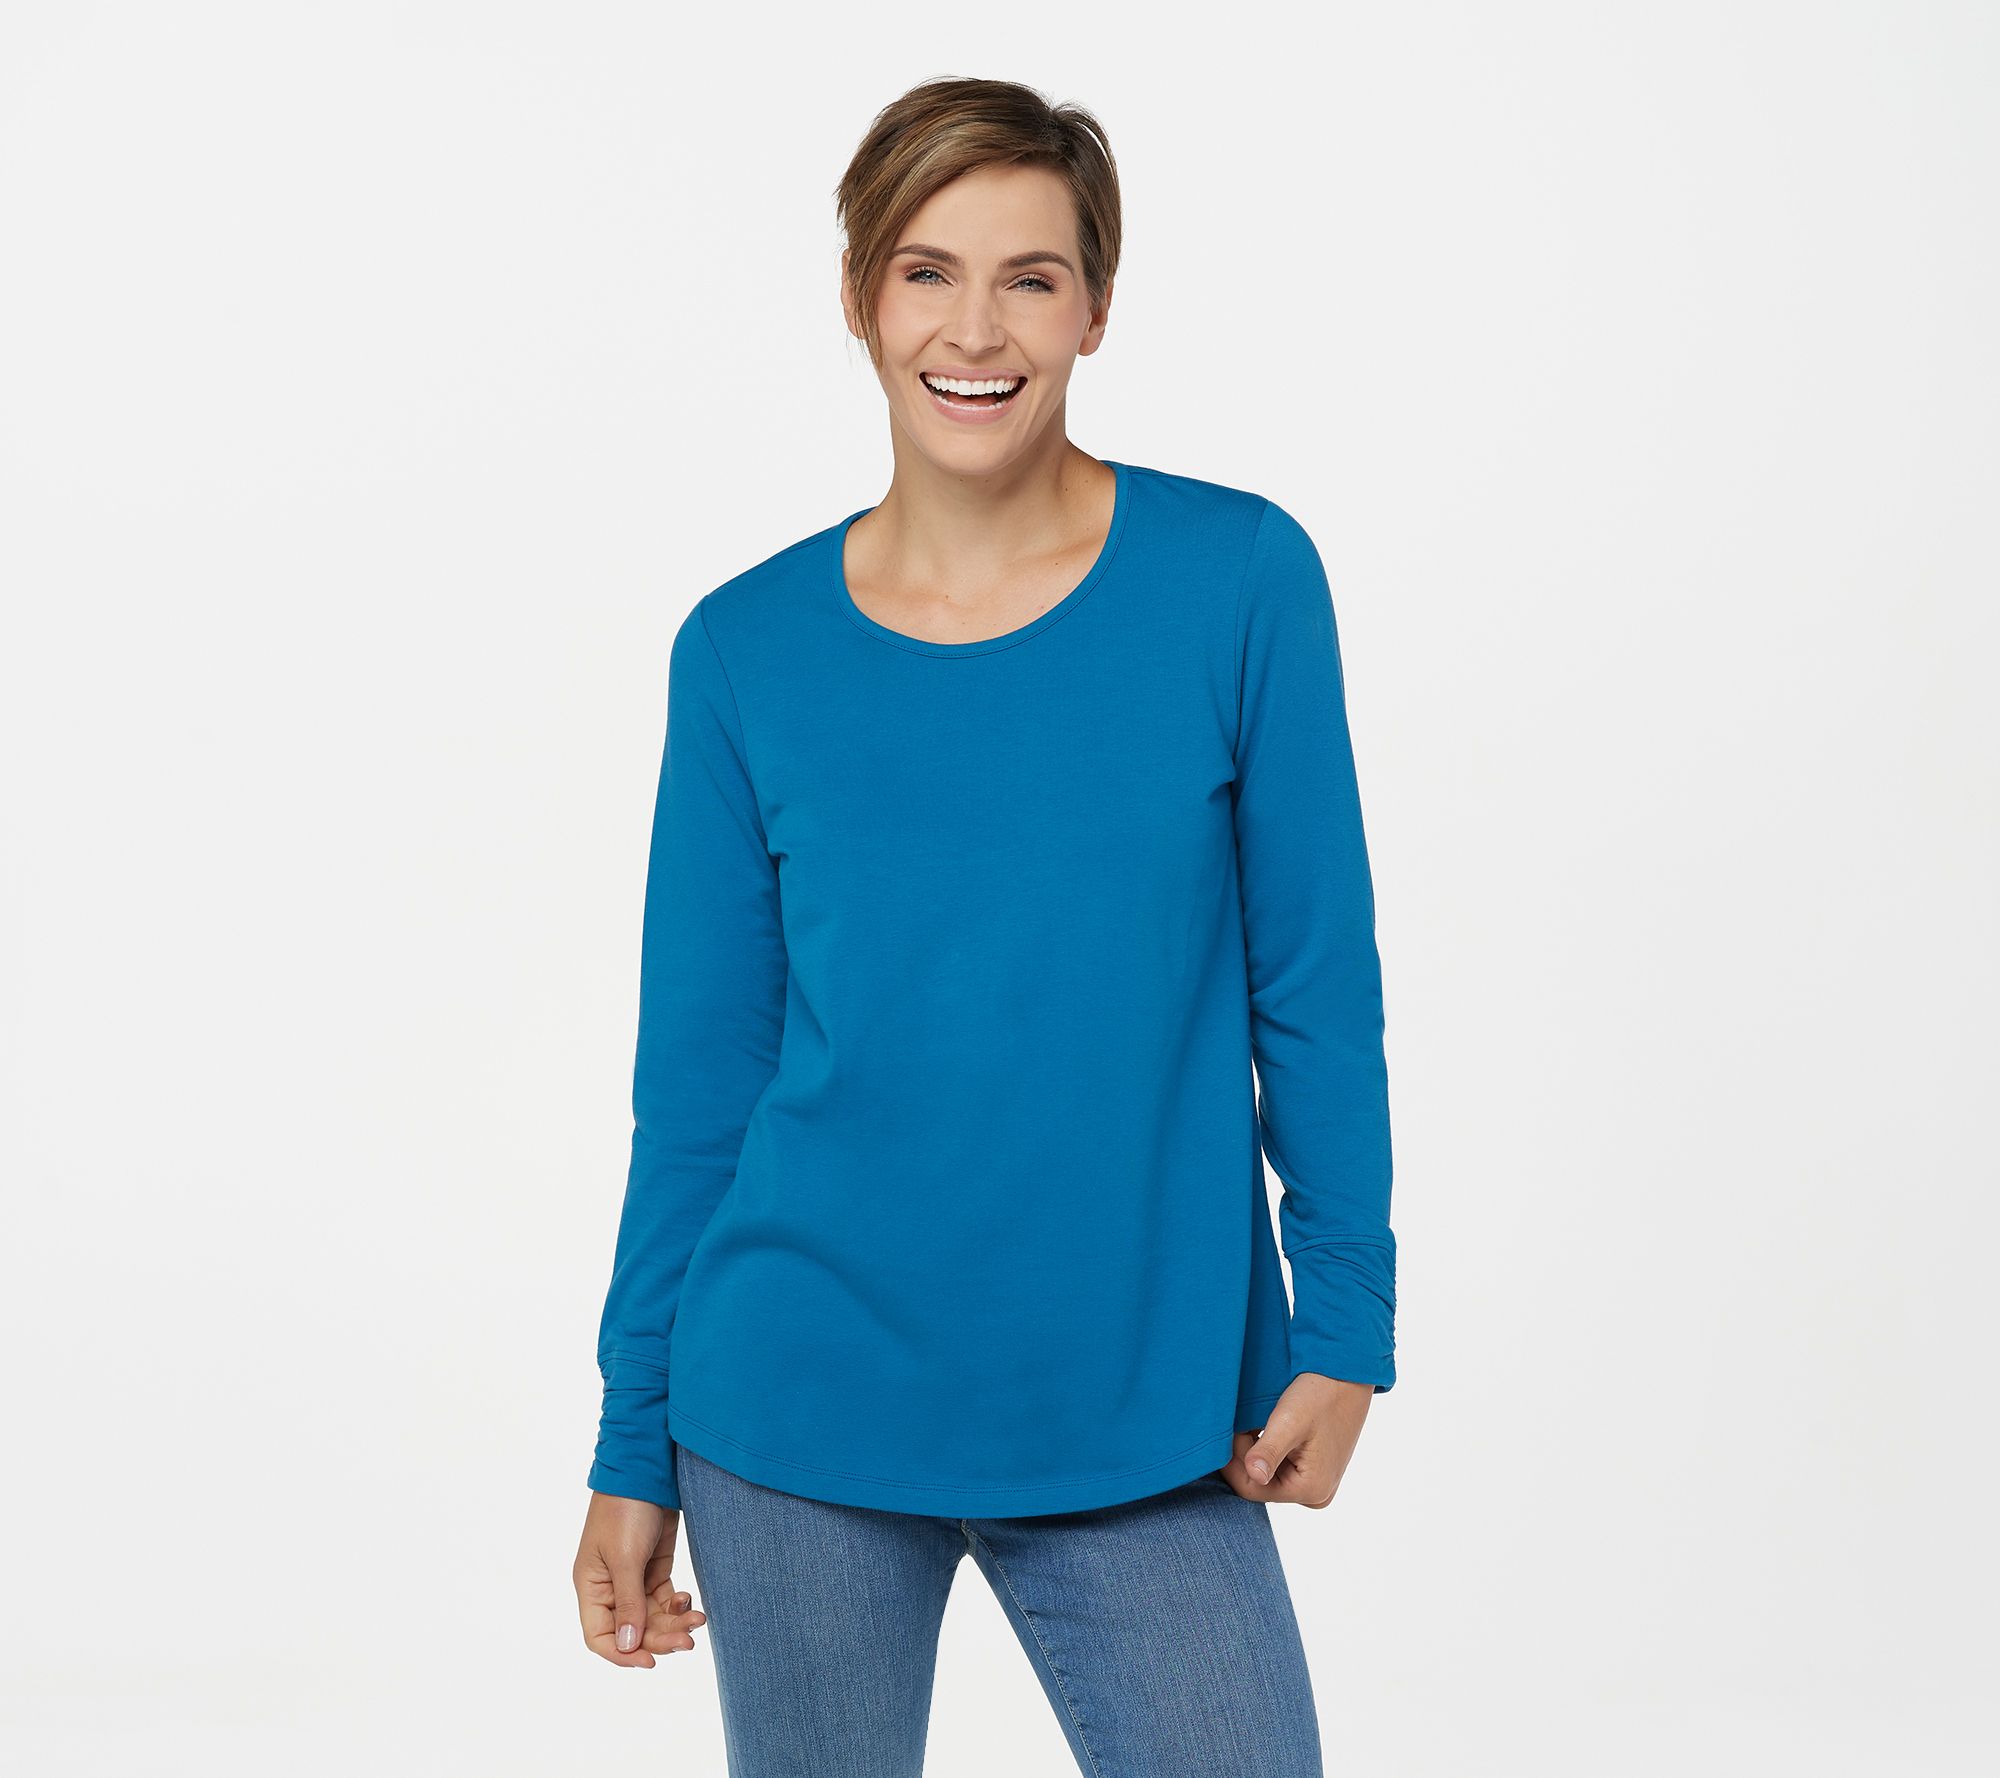 Denim & Co. Essentials French Terry Scoop Neck Long-Sleeve Top - QVC.com